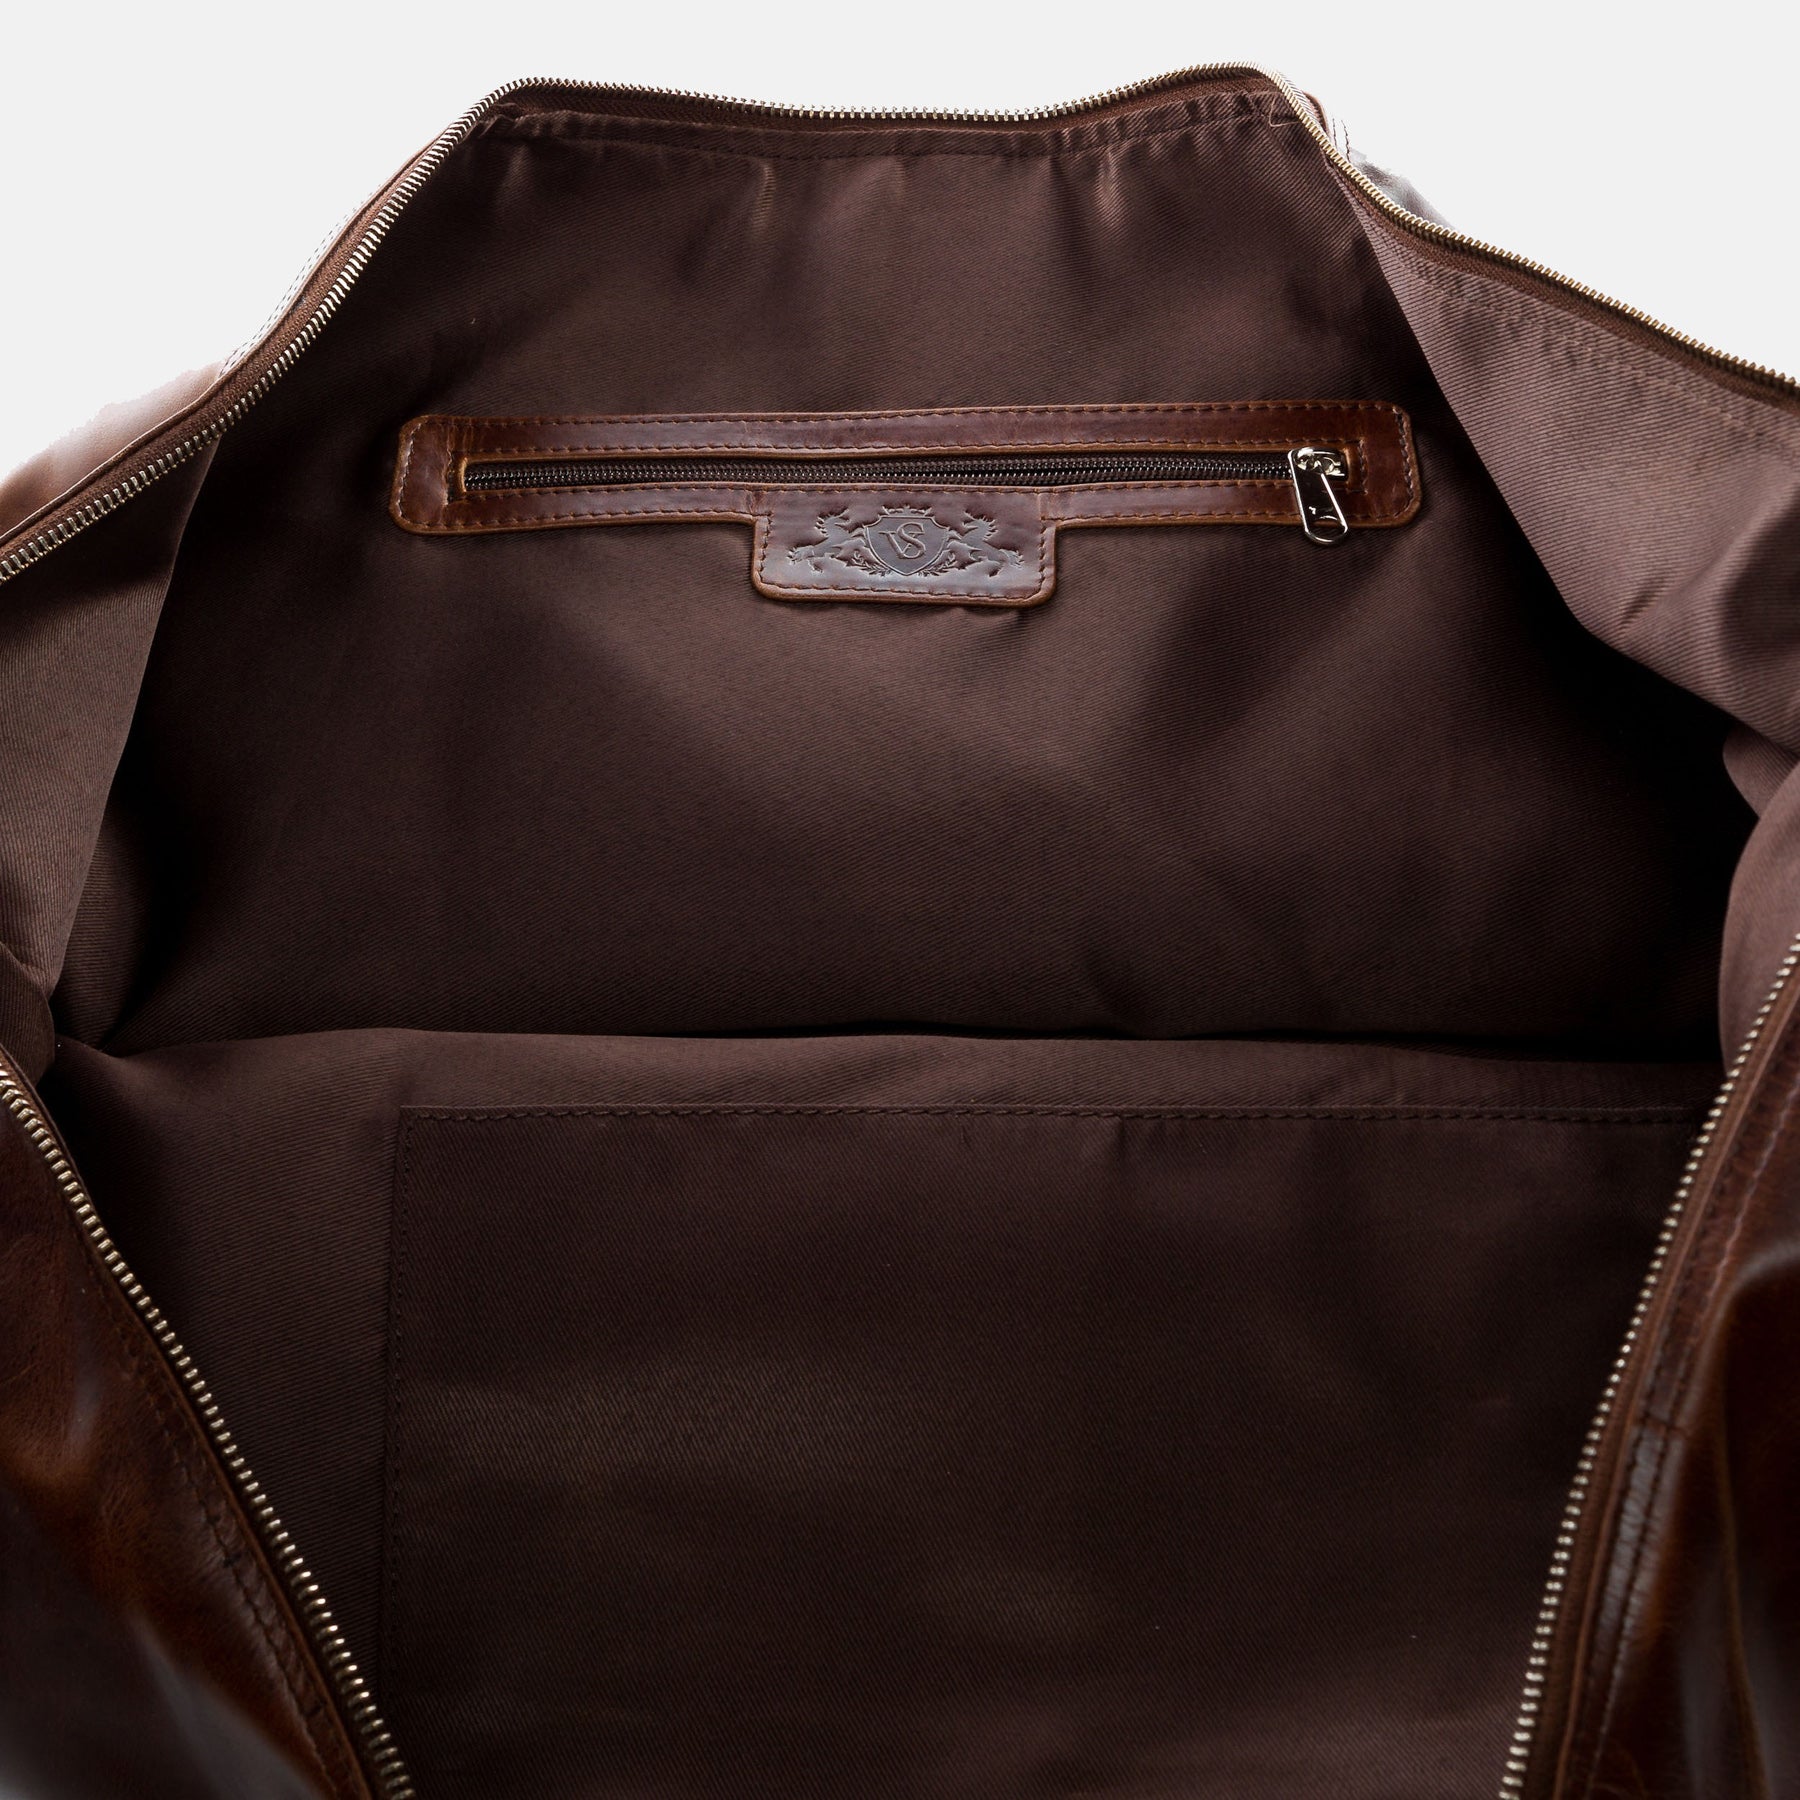 XL Travel bag CHESTER natural leather brown-cognac